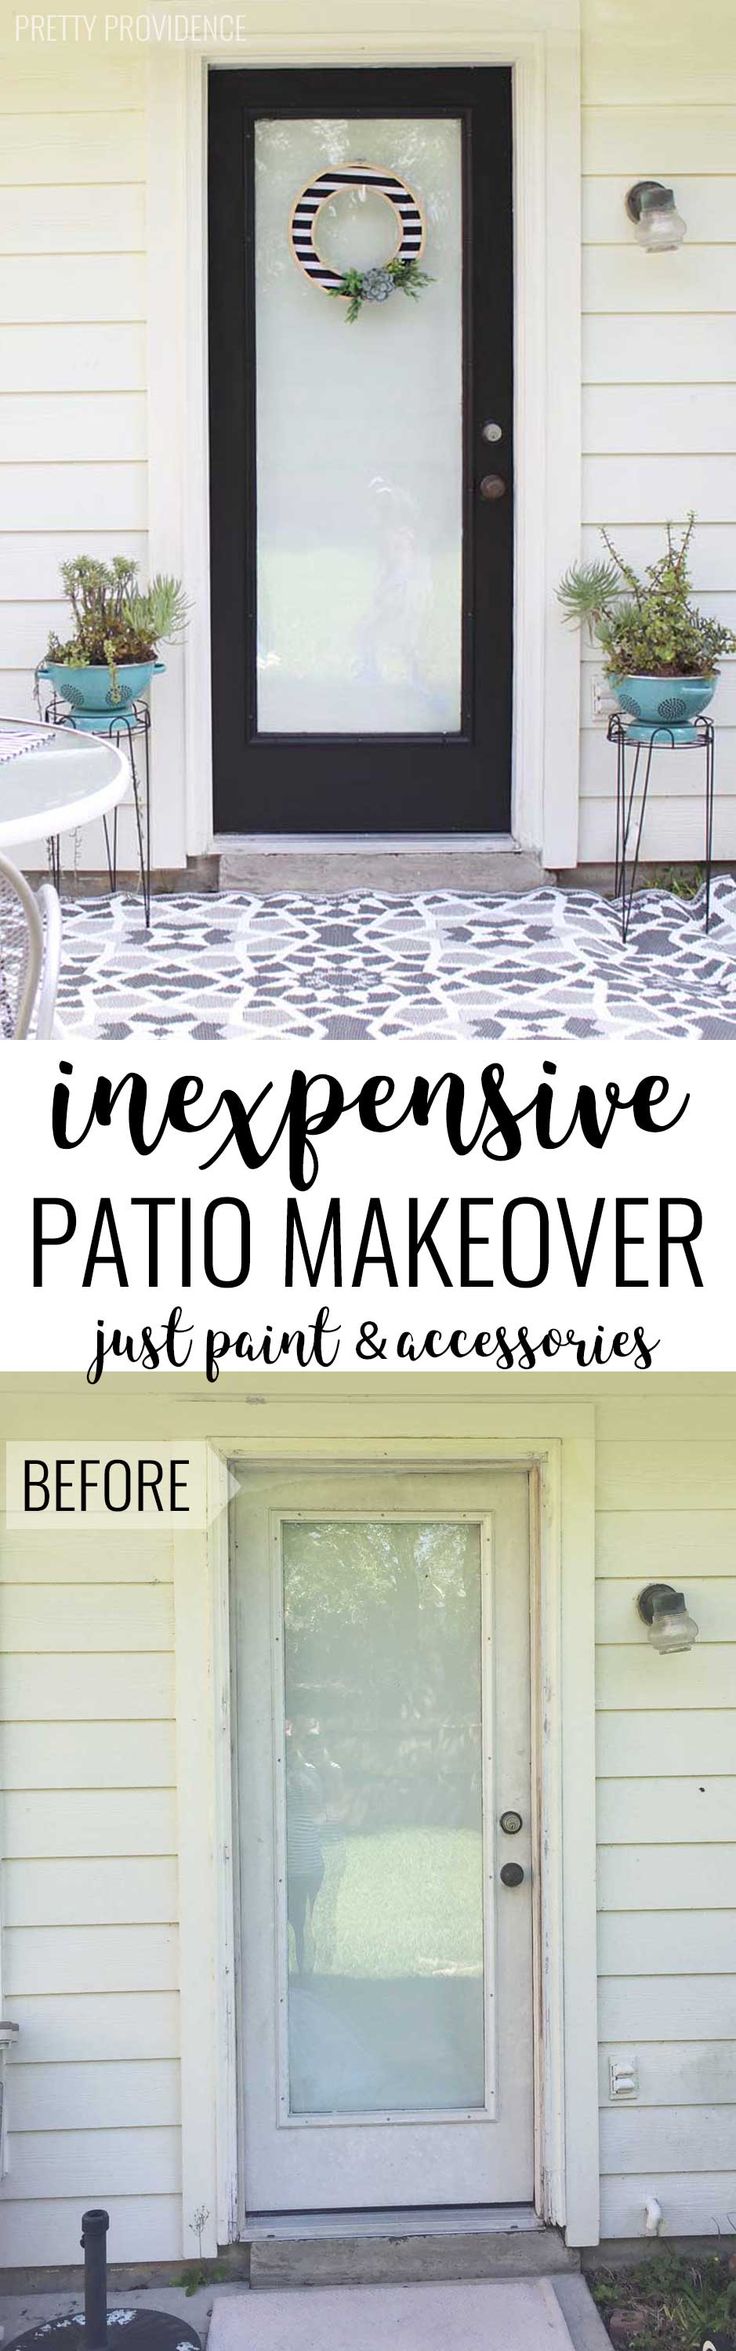 The power of PAINT! This door and patio area looks incredible and the transforma...